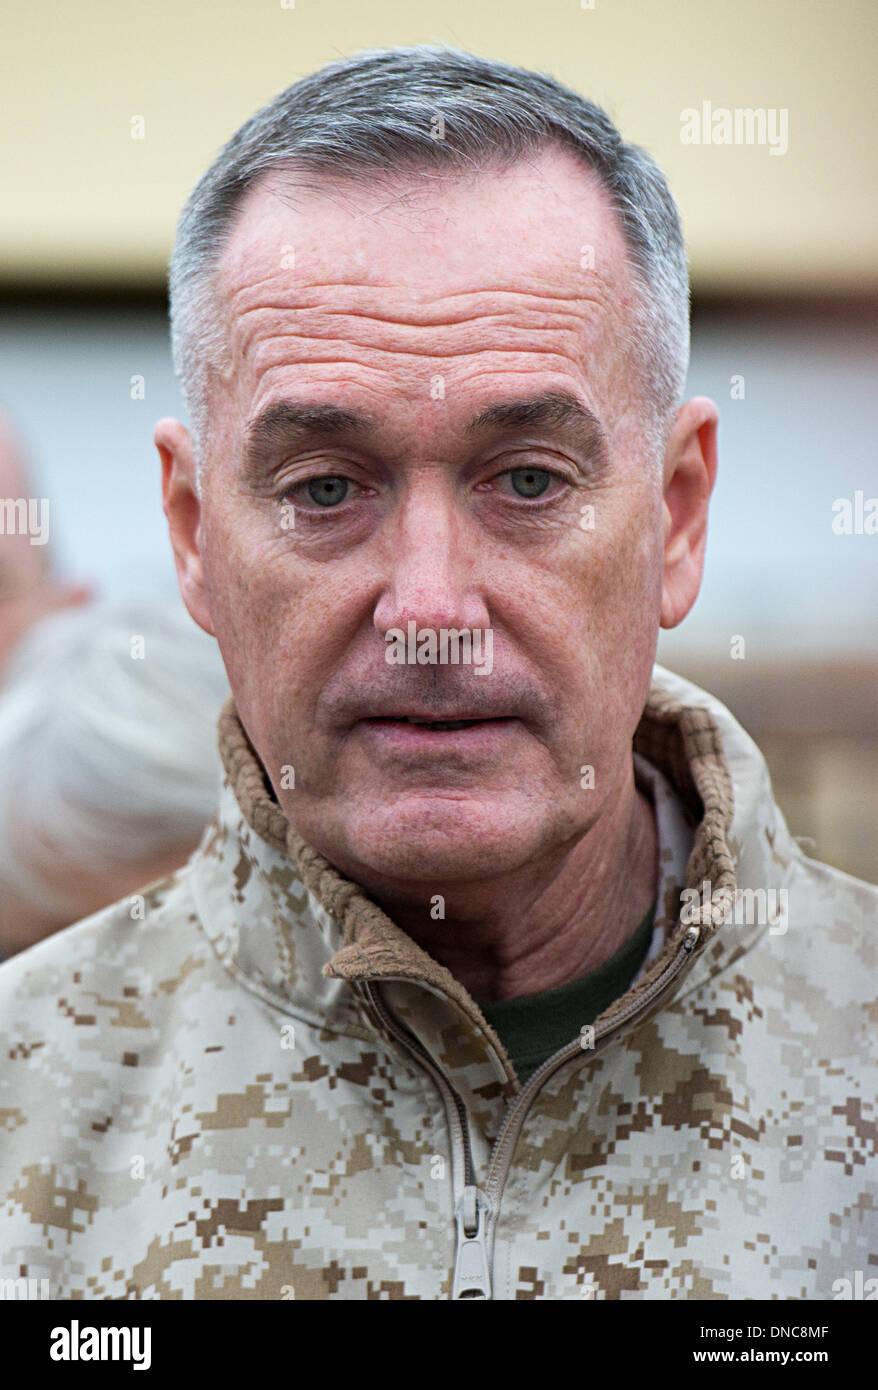 Masar-e Sharif, Afghanistan. 22nd Dec, 2013. US General Joseph Dunford, Supreme Commander of the ISAF troops in Afghanistan, speaks at Camp Marmal in Masar-e Sharif, Afghanistan, 22 December 2013. Photo: Maurizio Gambarini/dpa/Alamy Live News Stock Photo